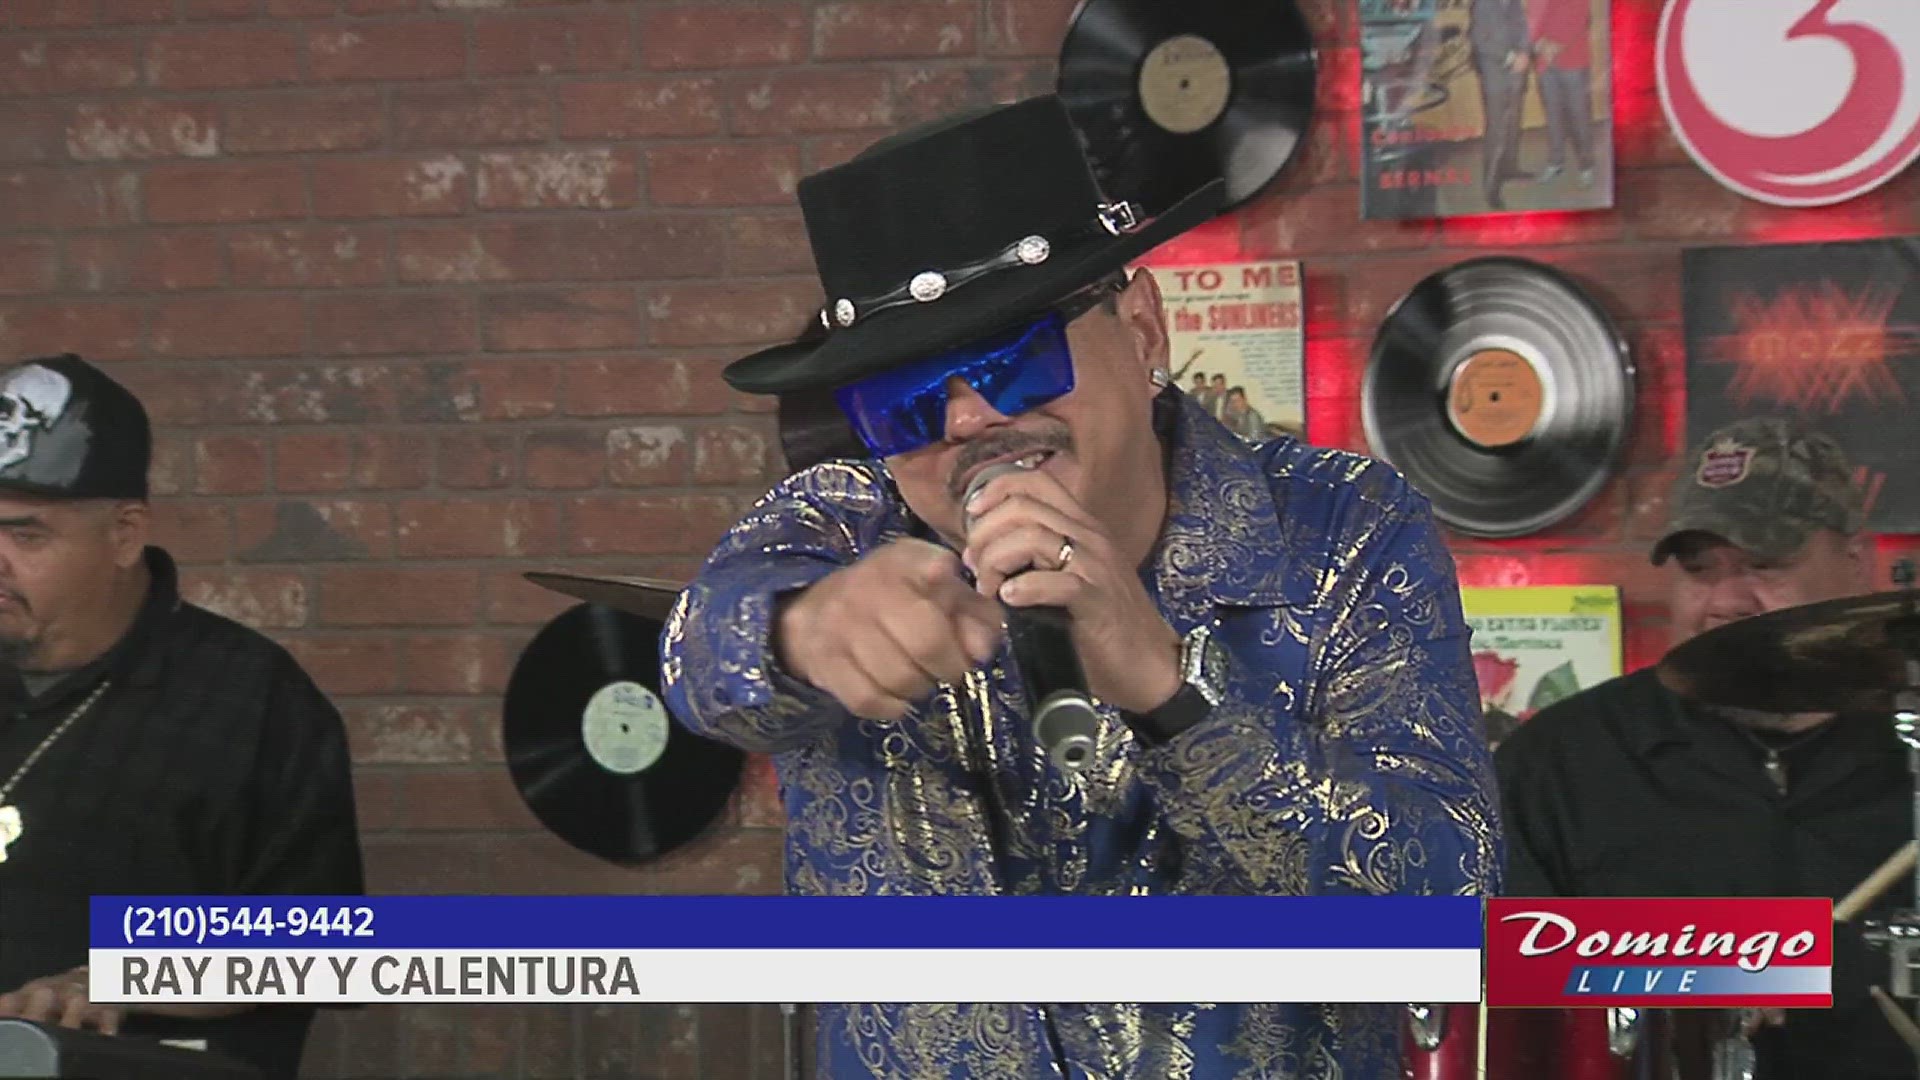 Ray Ray joined us on Domingo Live to perform his cover of  Stephanie Lynn's "Ojos Para Ti."